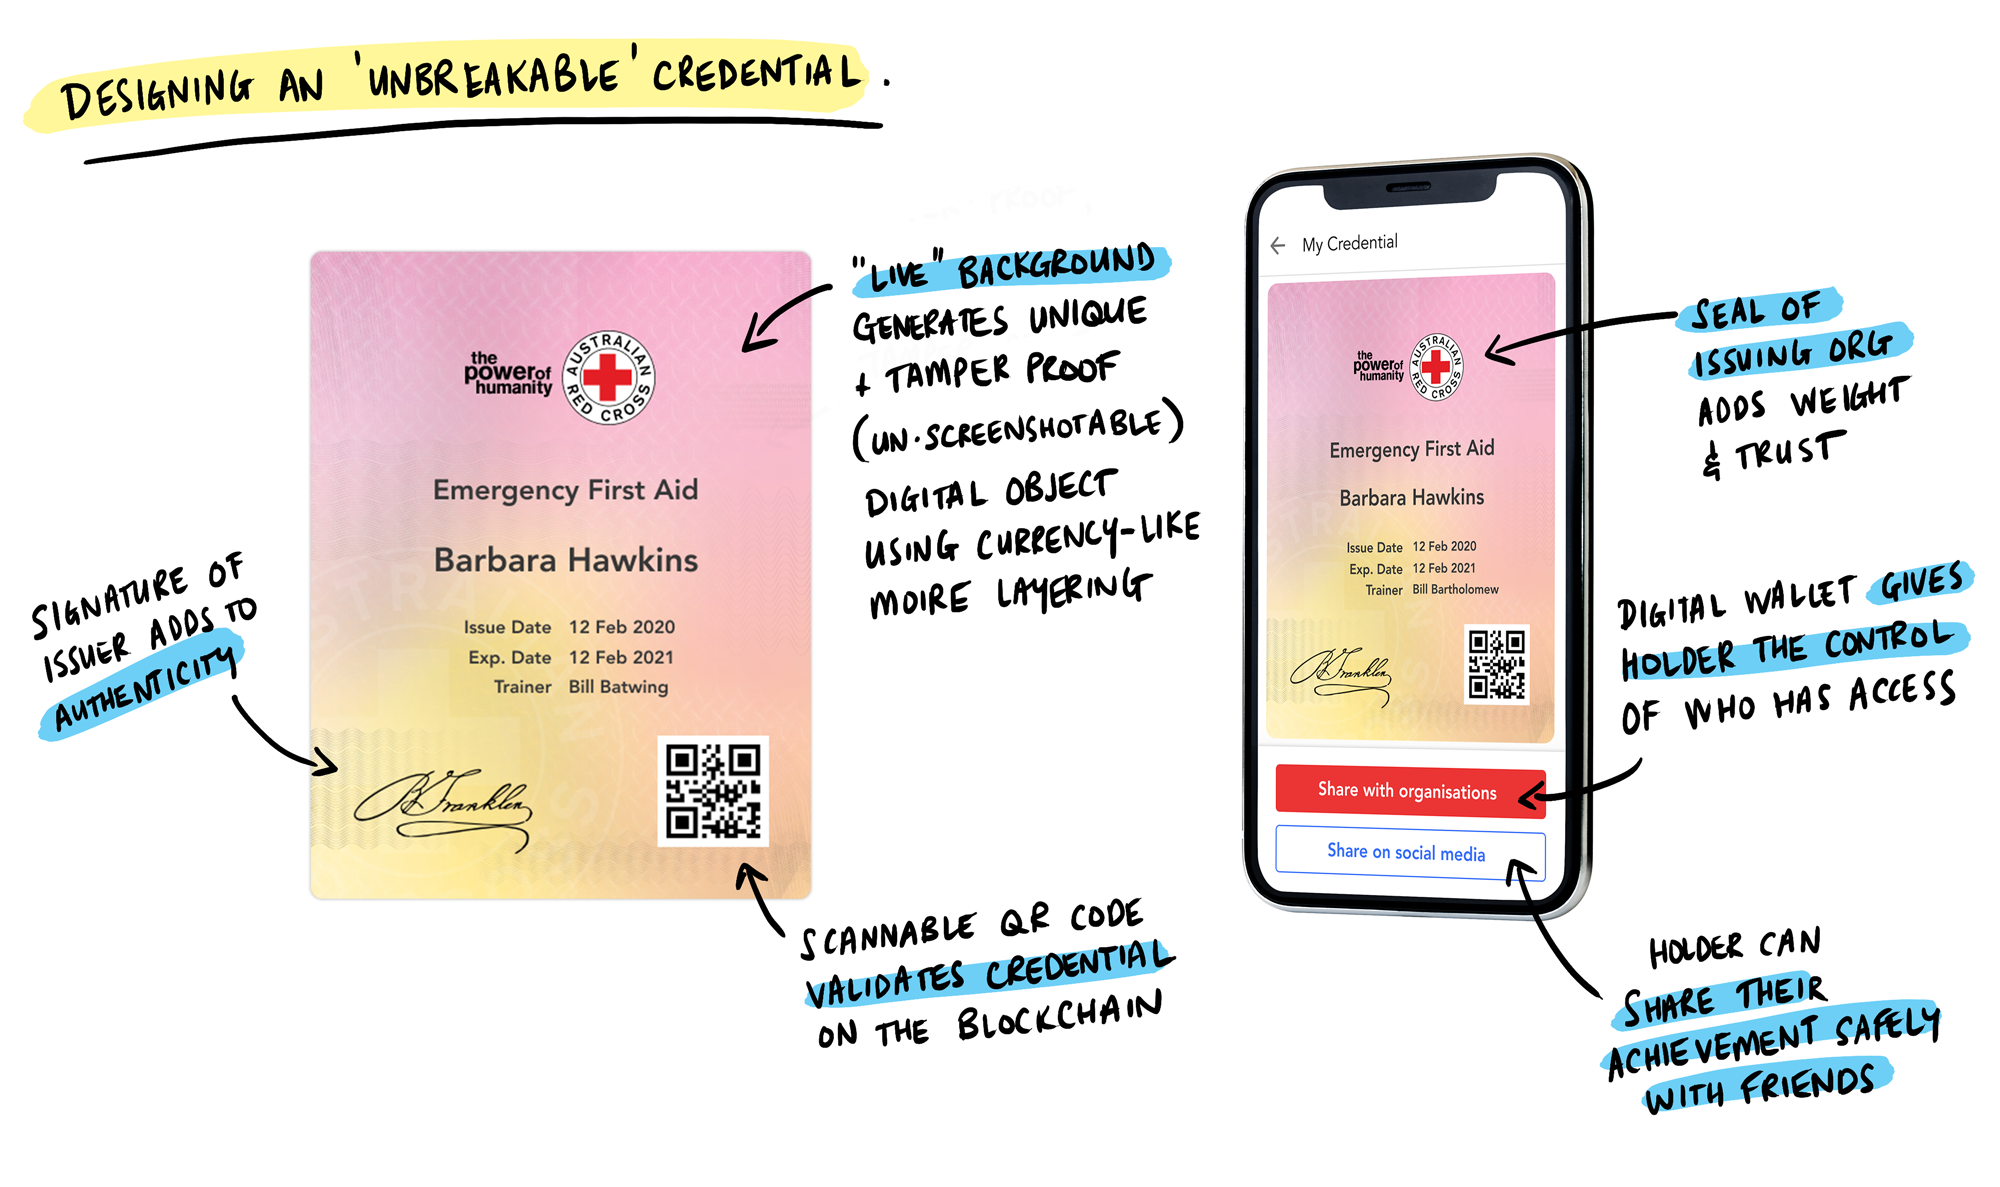 The design concept for an unbreakable' credential